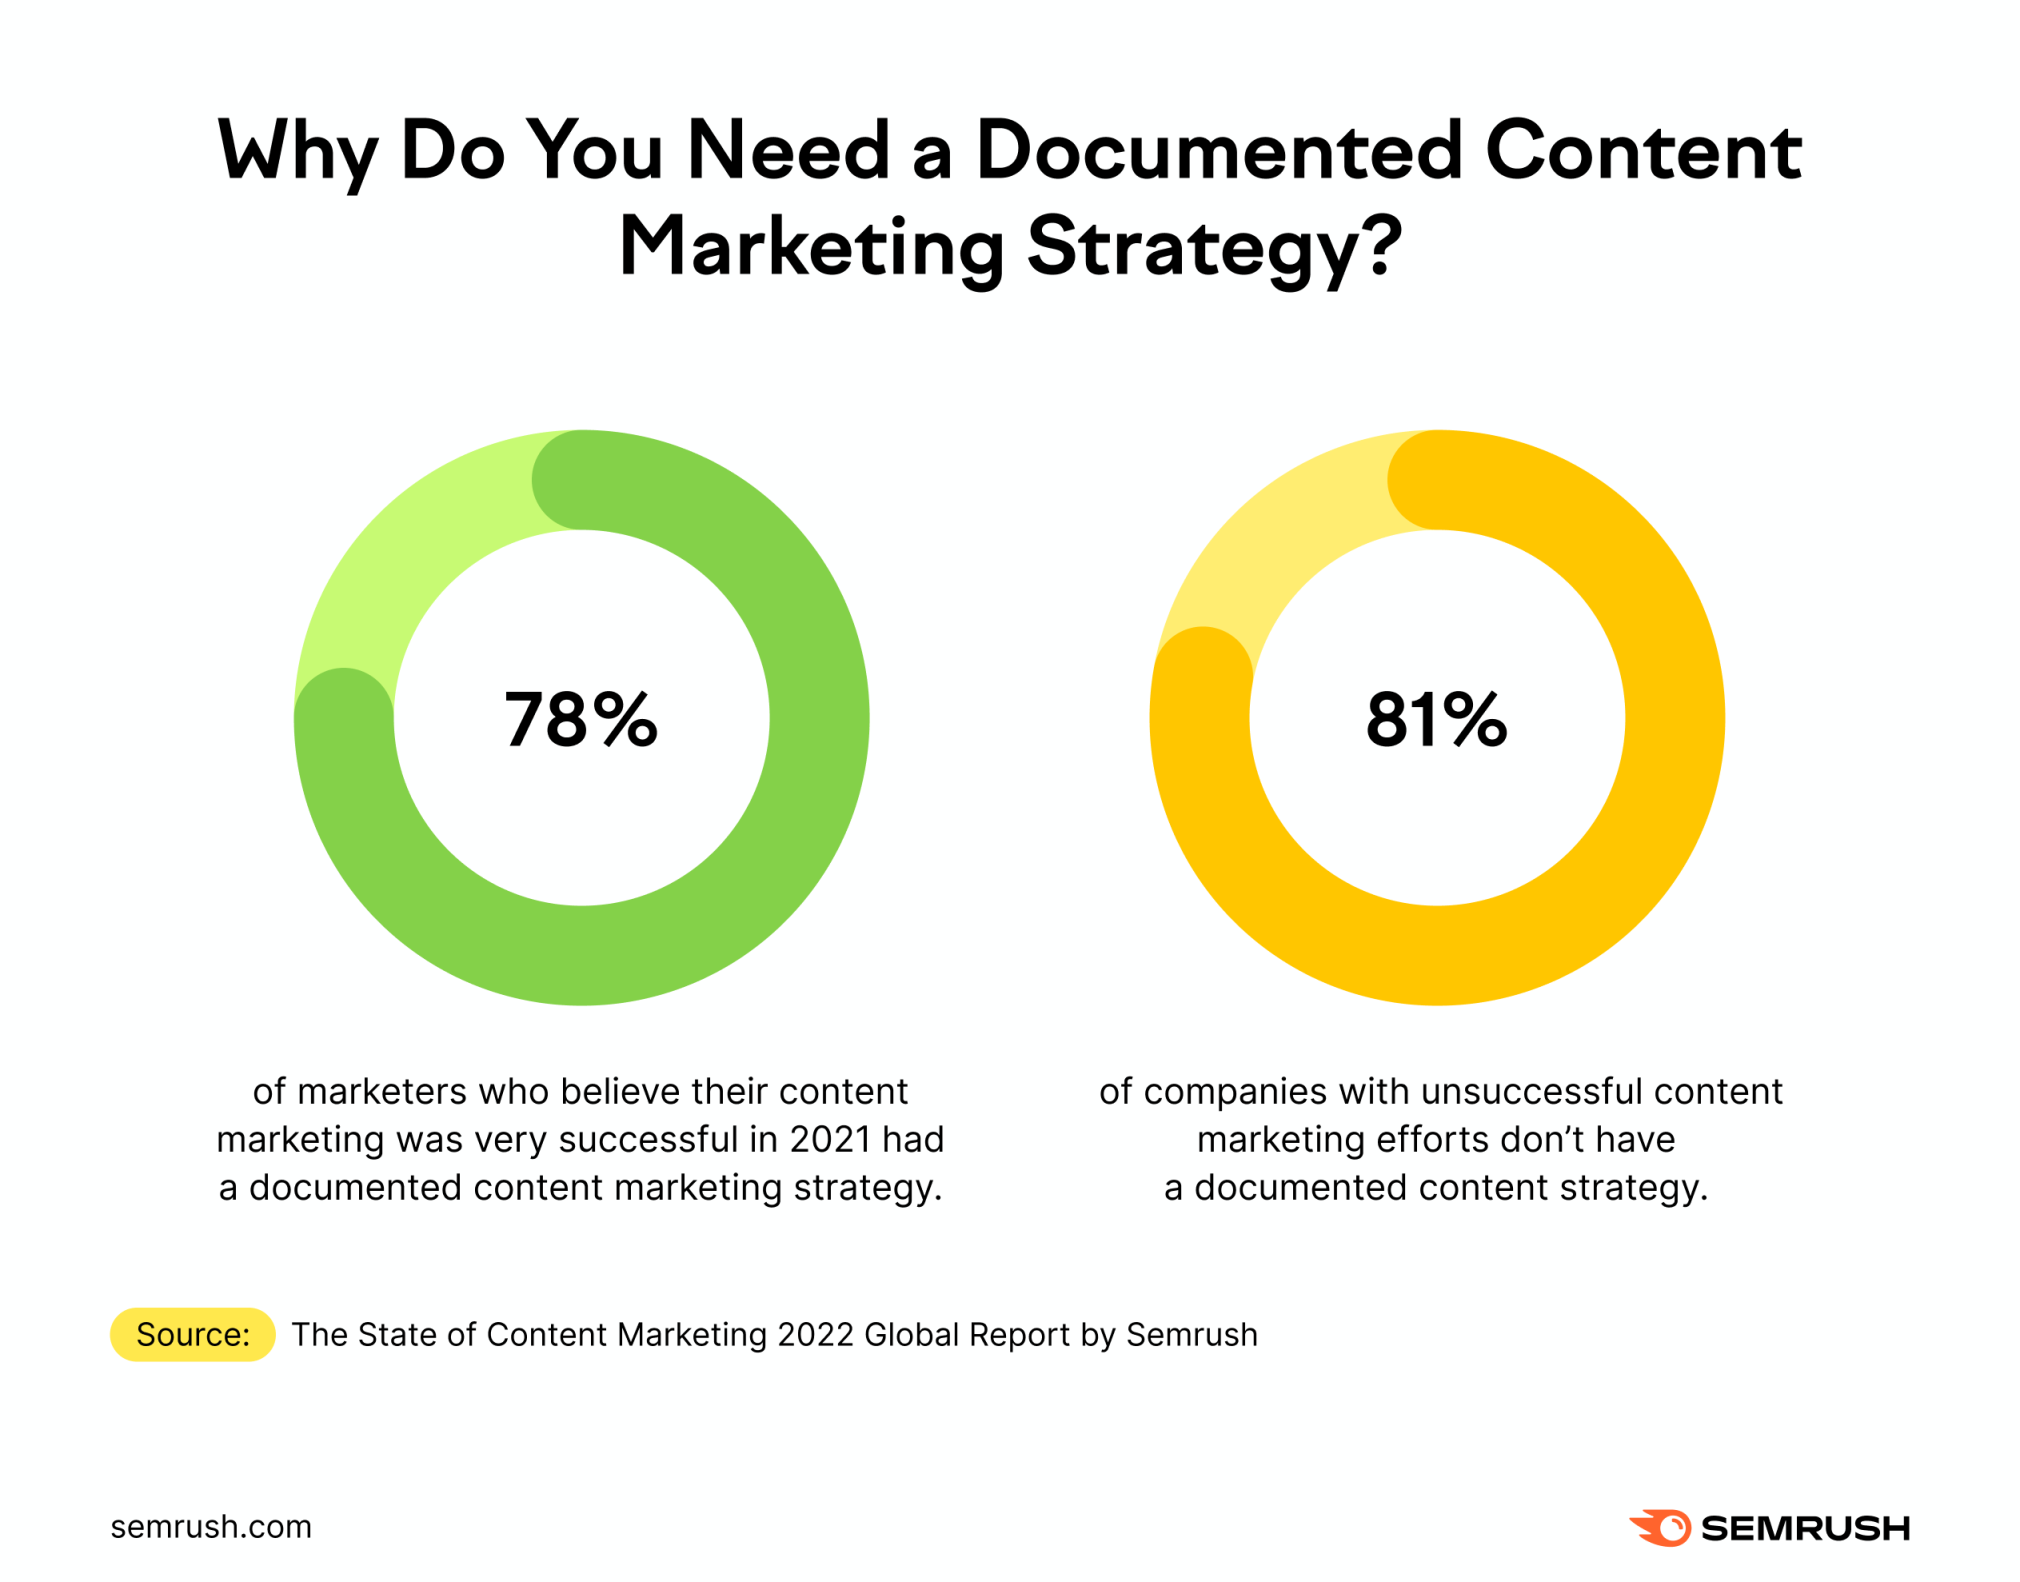 Why do you need a documented content strategy